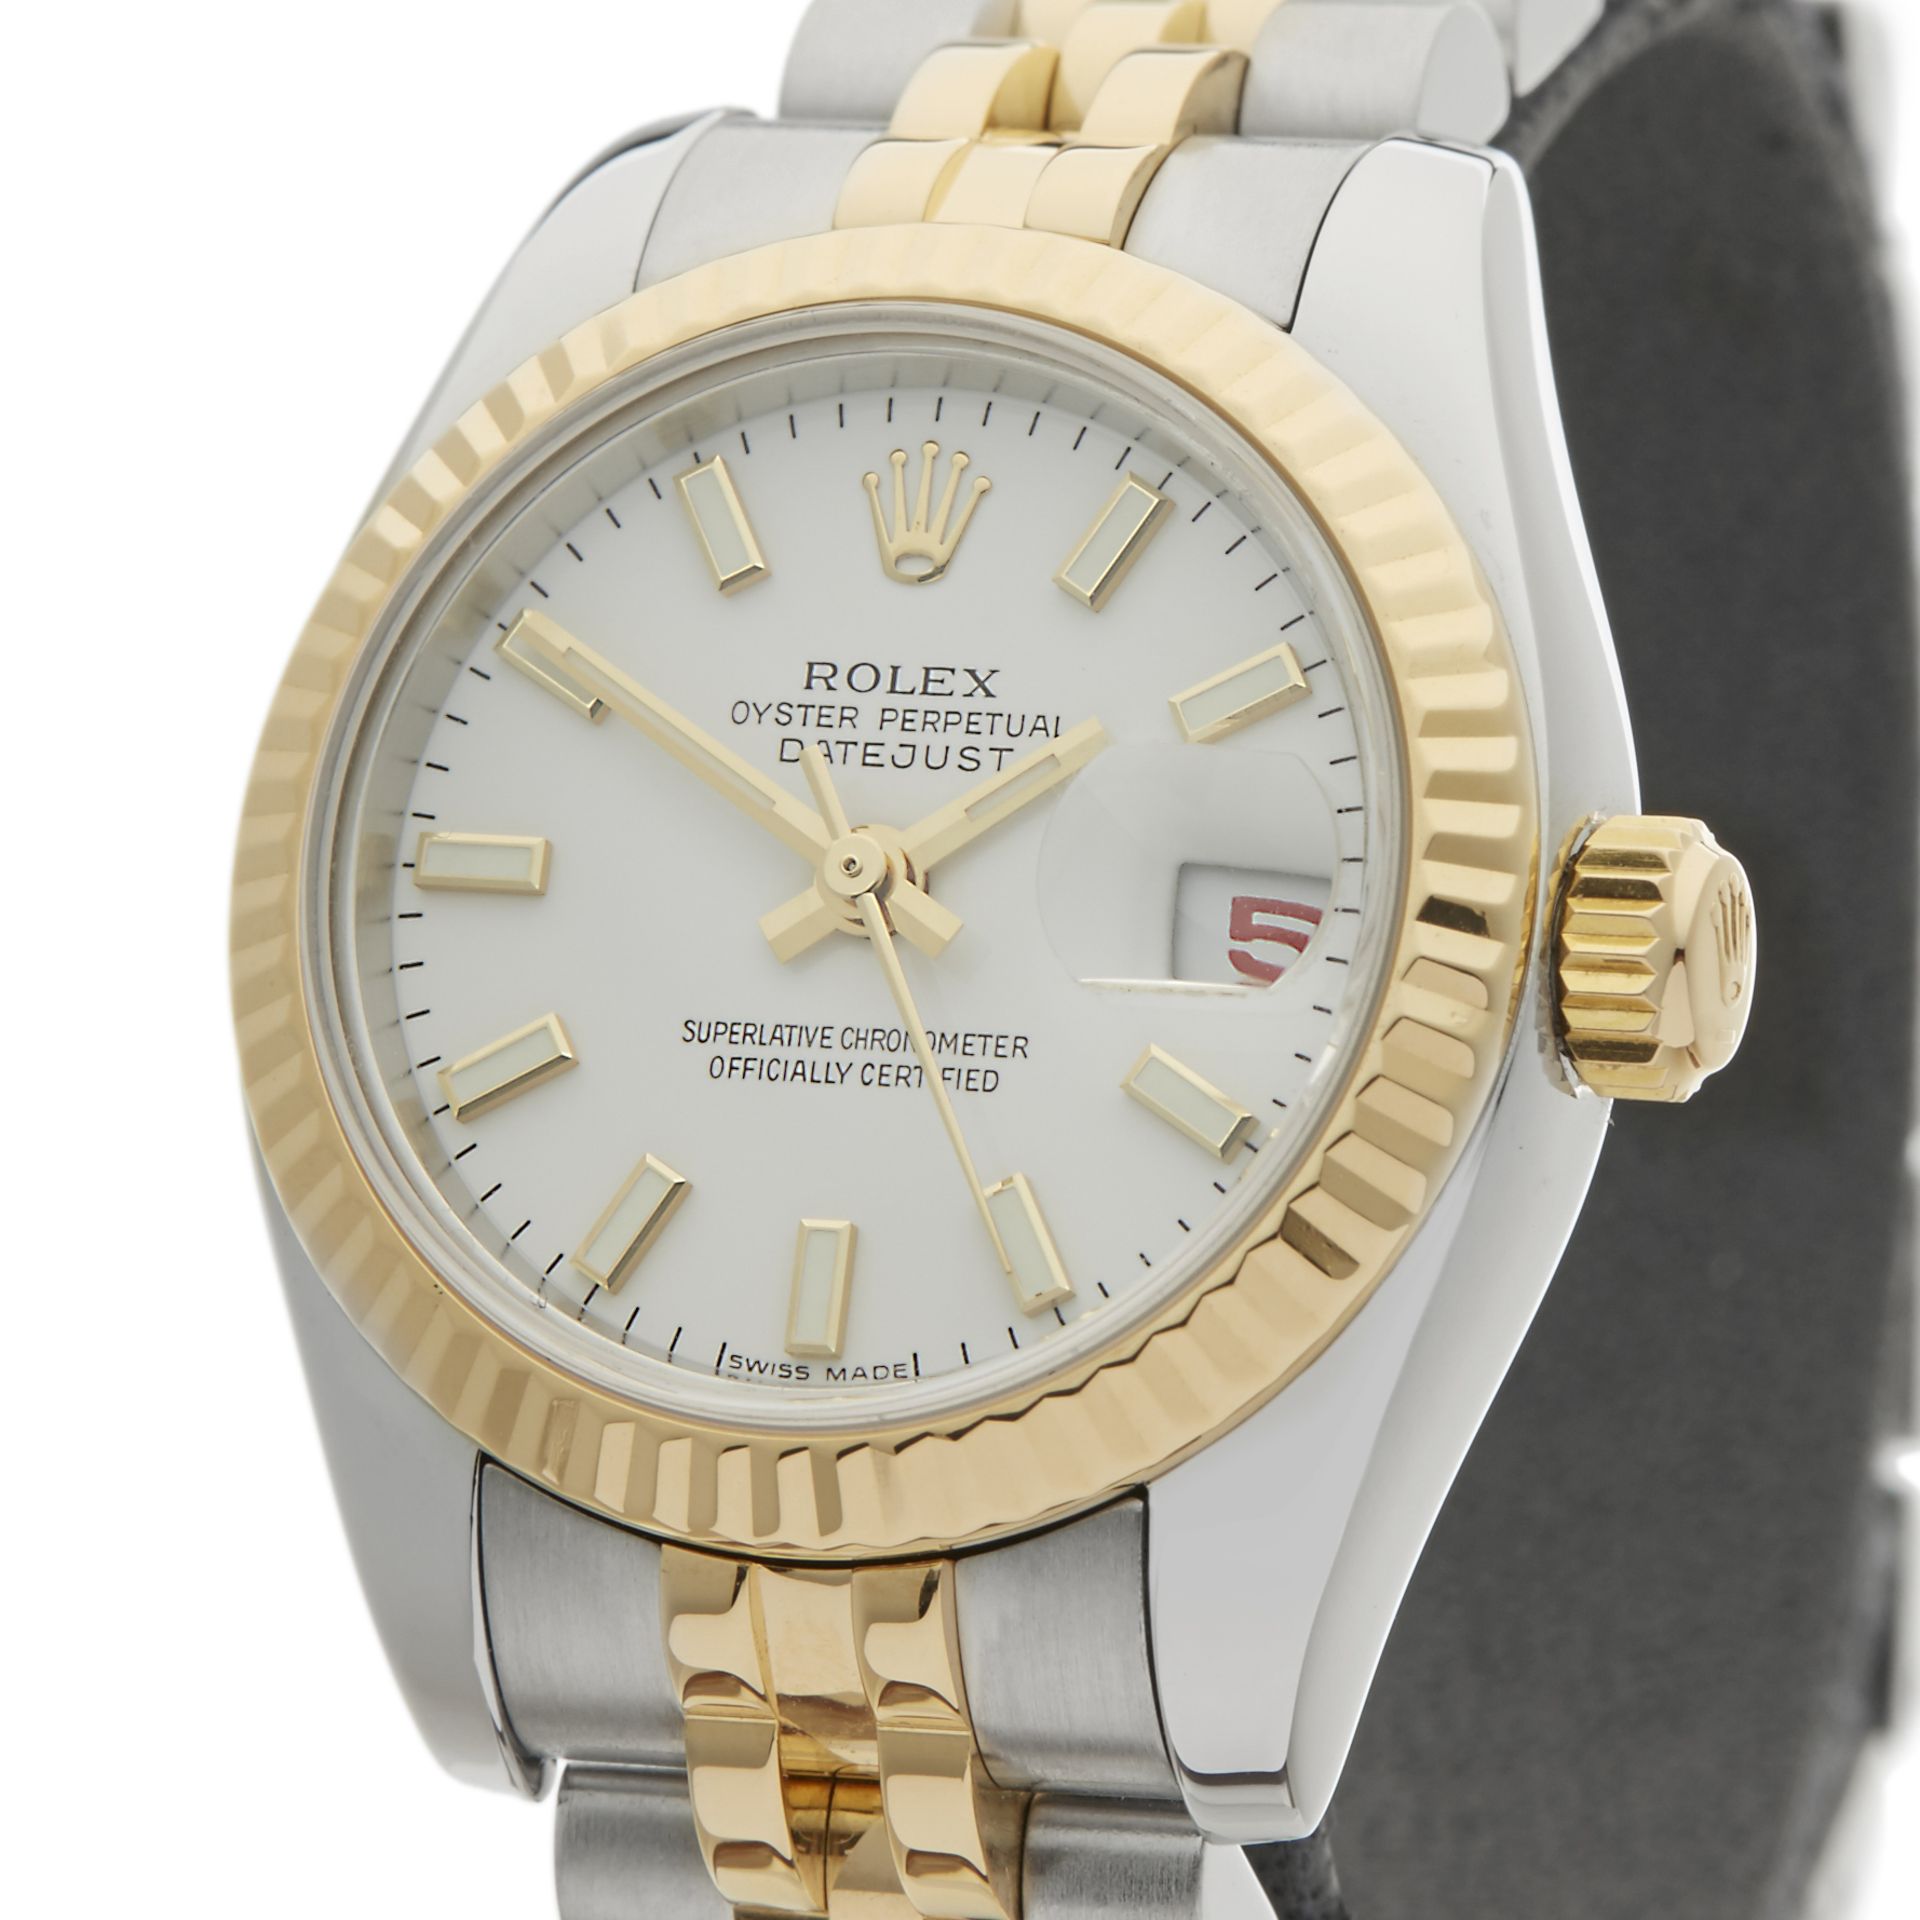 Datejust 26mm Stainless Steel & 18k Yellow Gold - 179173 - Image 3 of 9